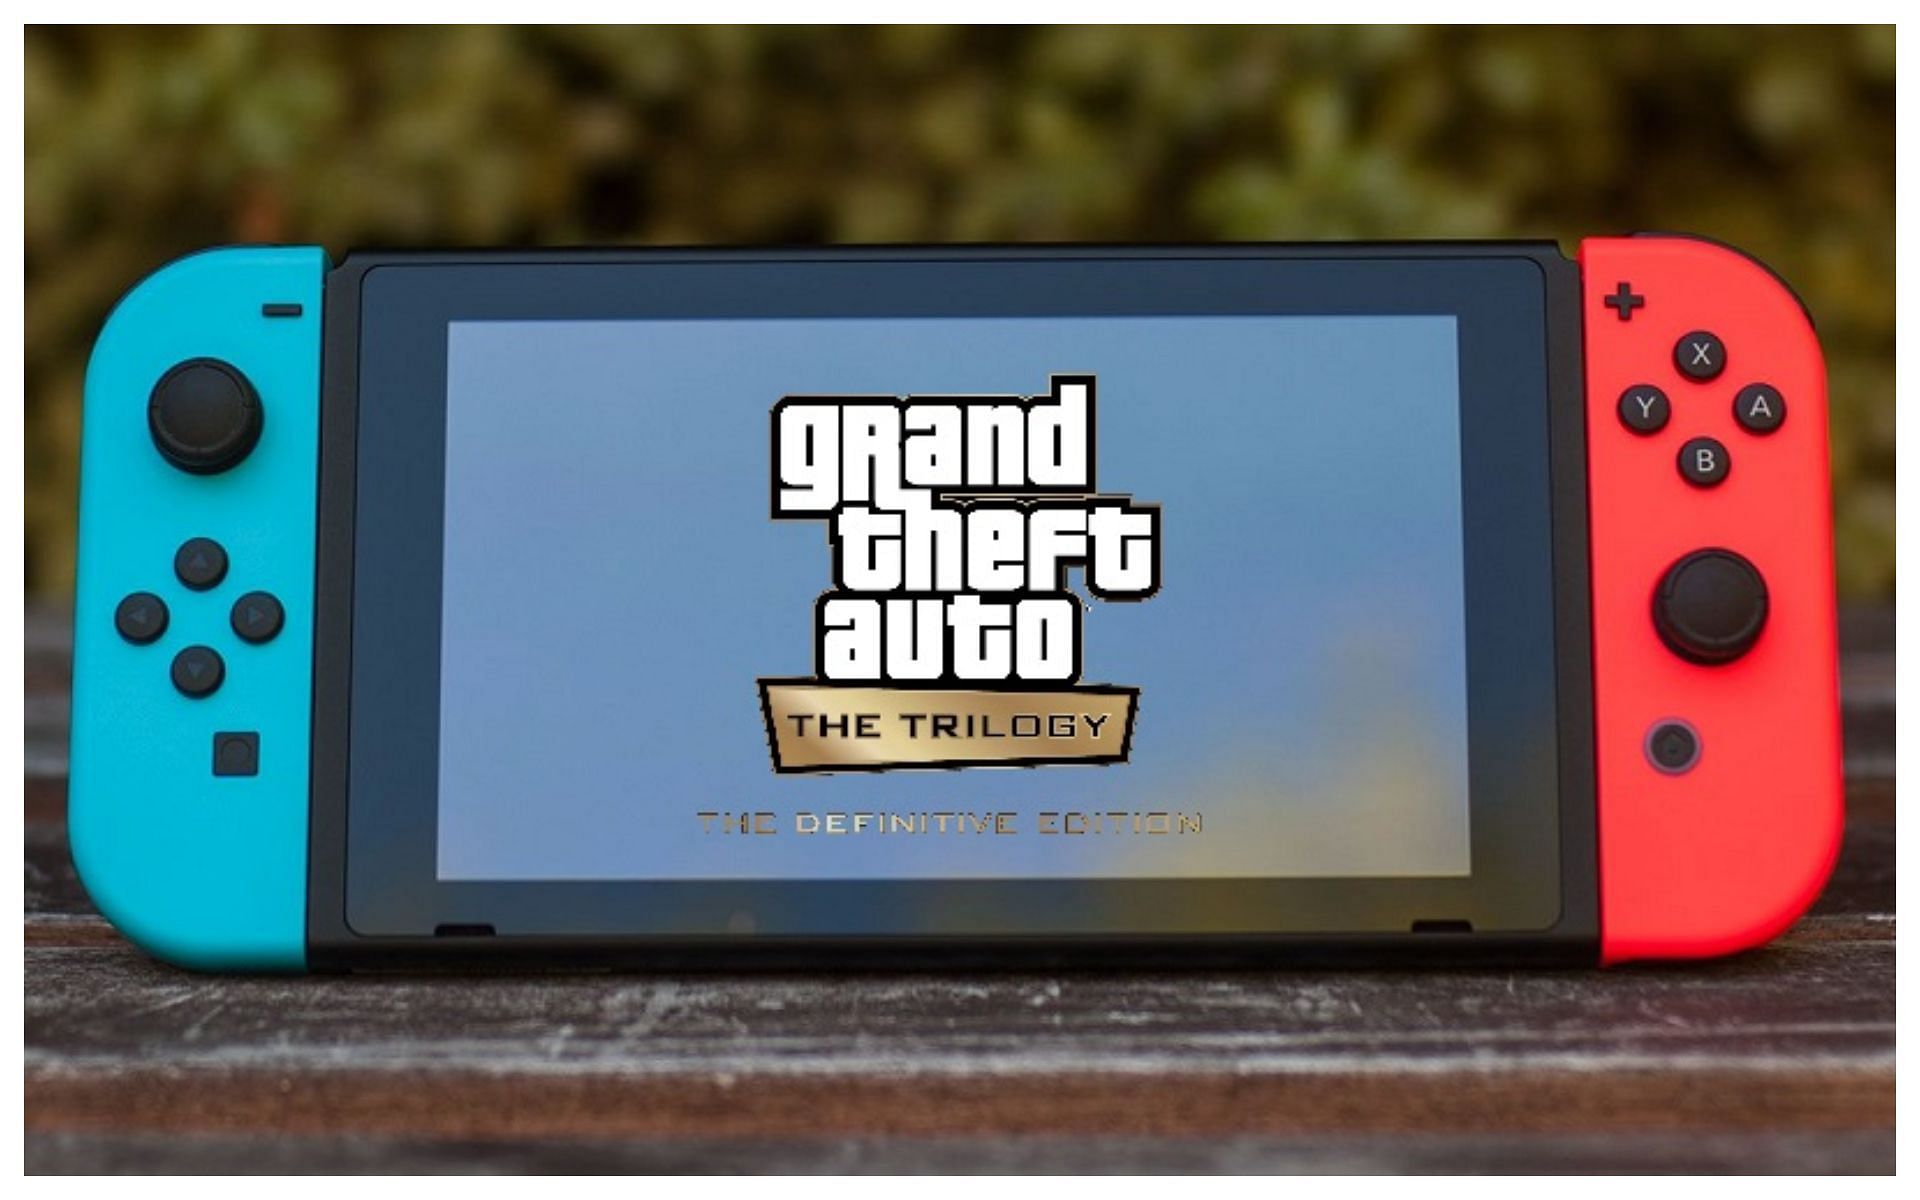 Just got the trilogy on switch, updated it, and it is nowhere near